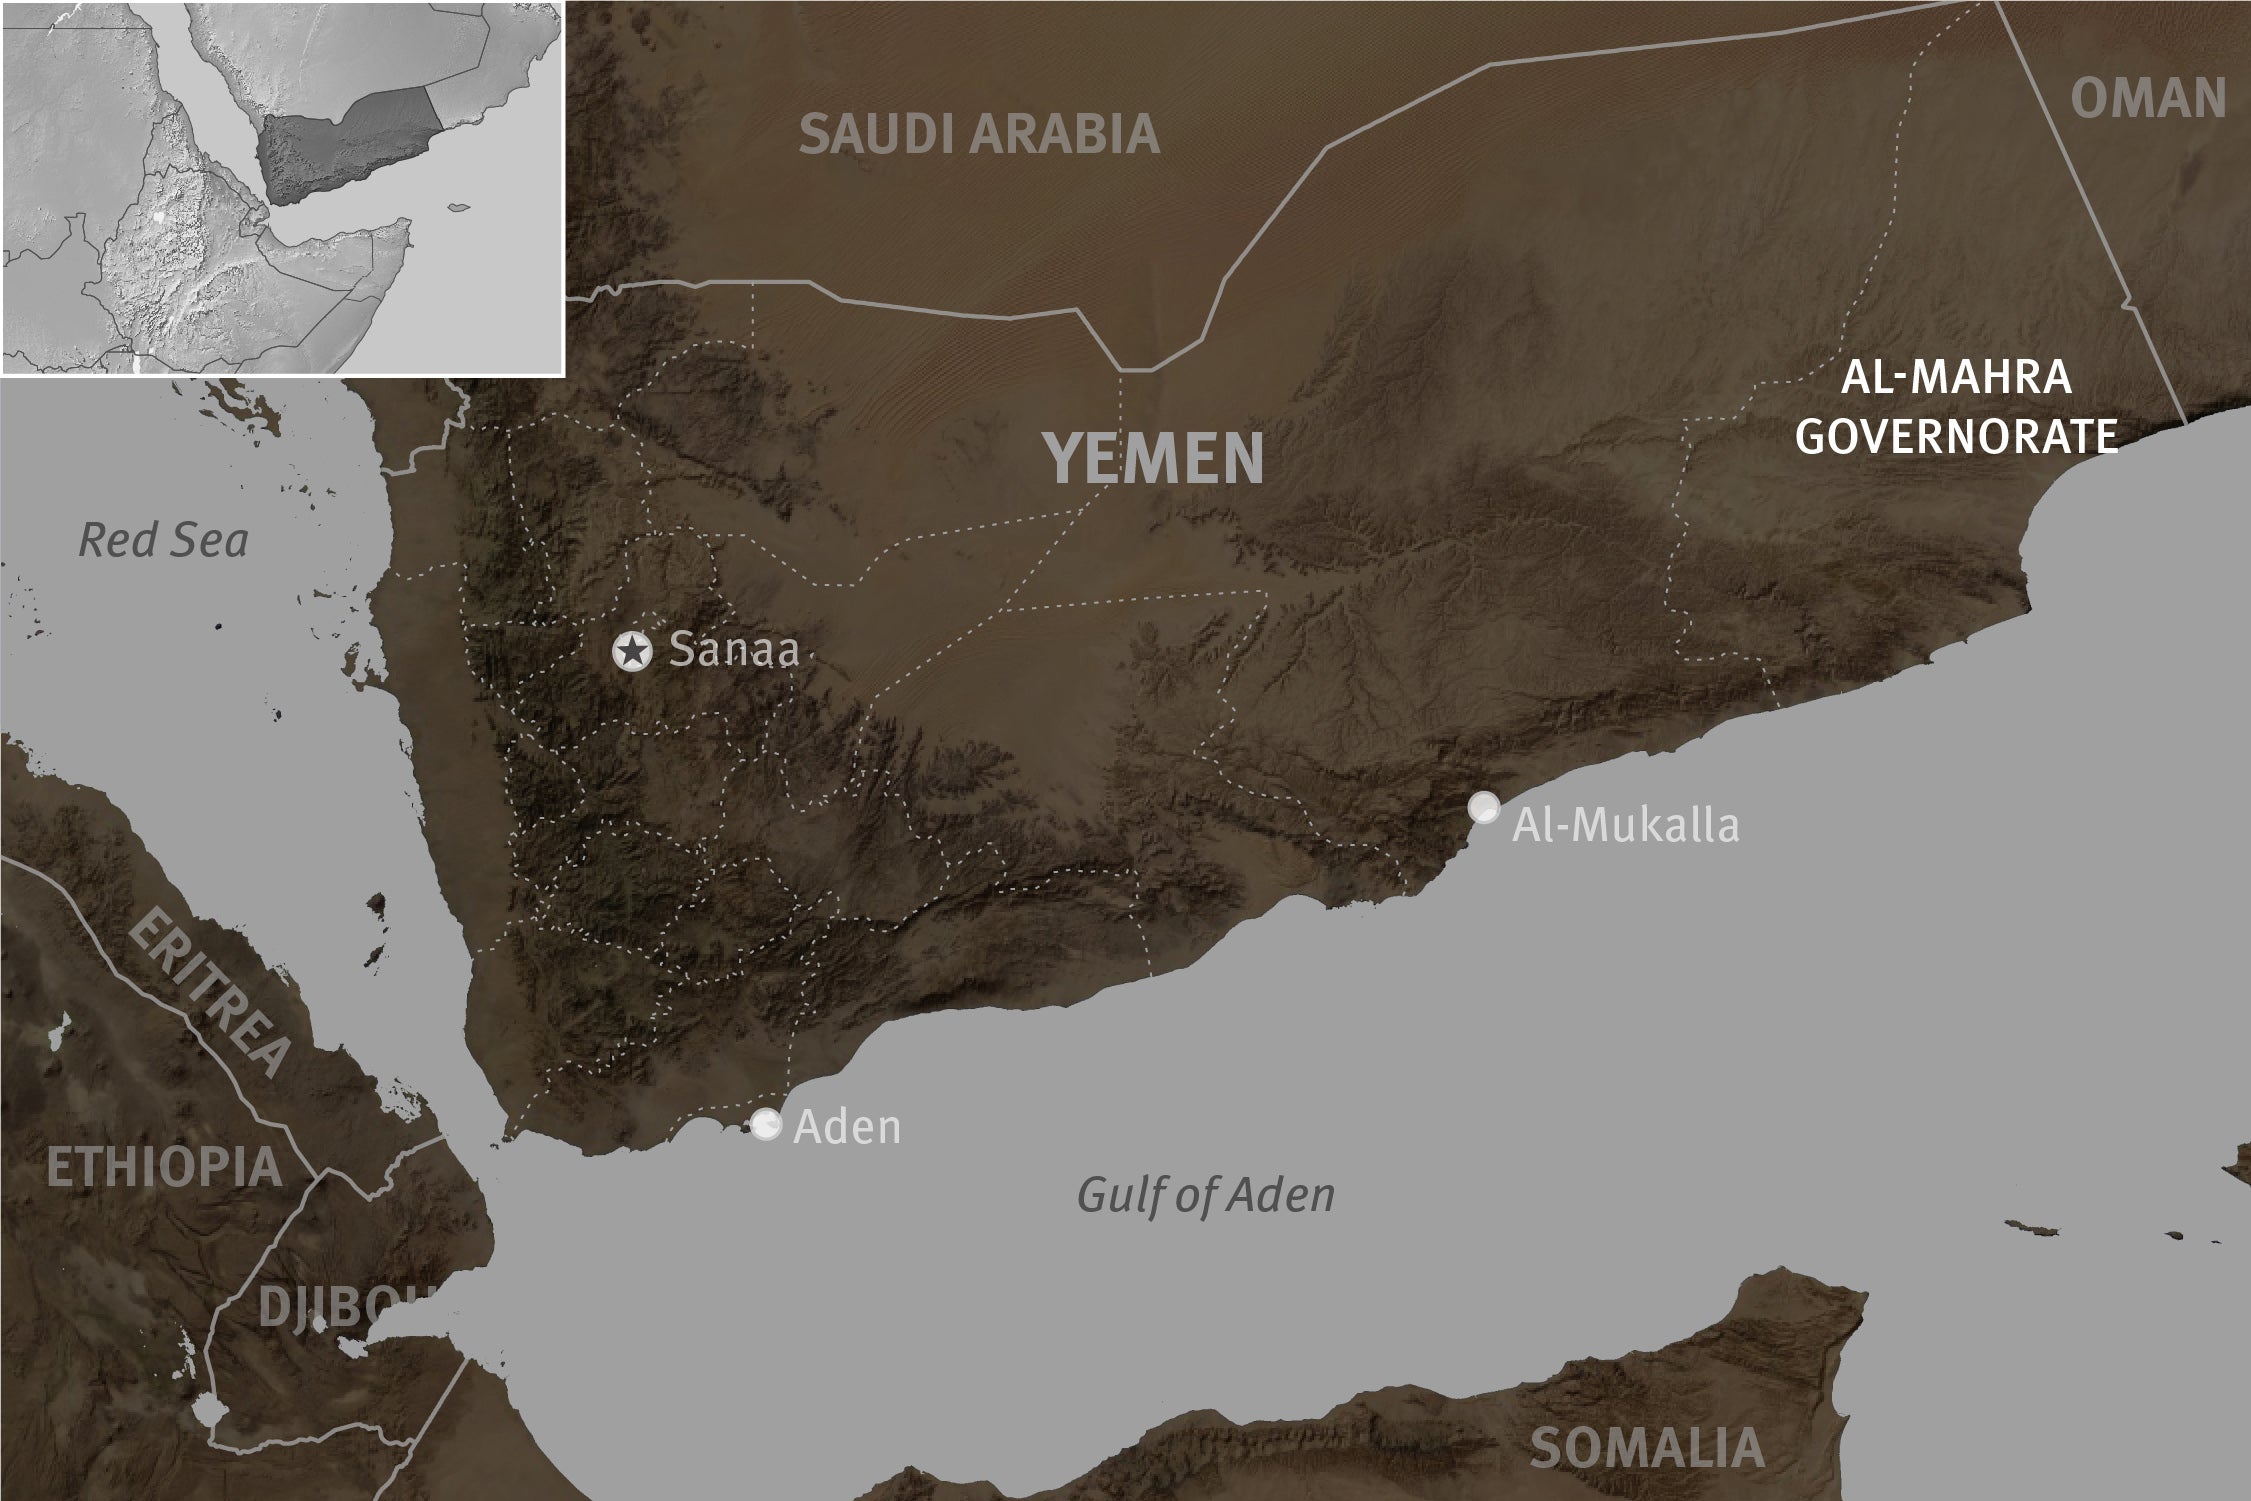 Yemen: Saudi Forces Torture, ‘Disappear’ Yemenis | Human Rights Watch